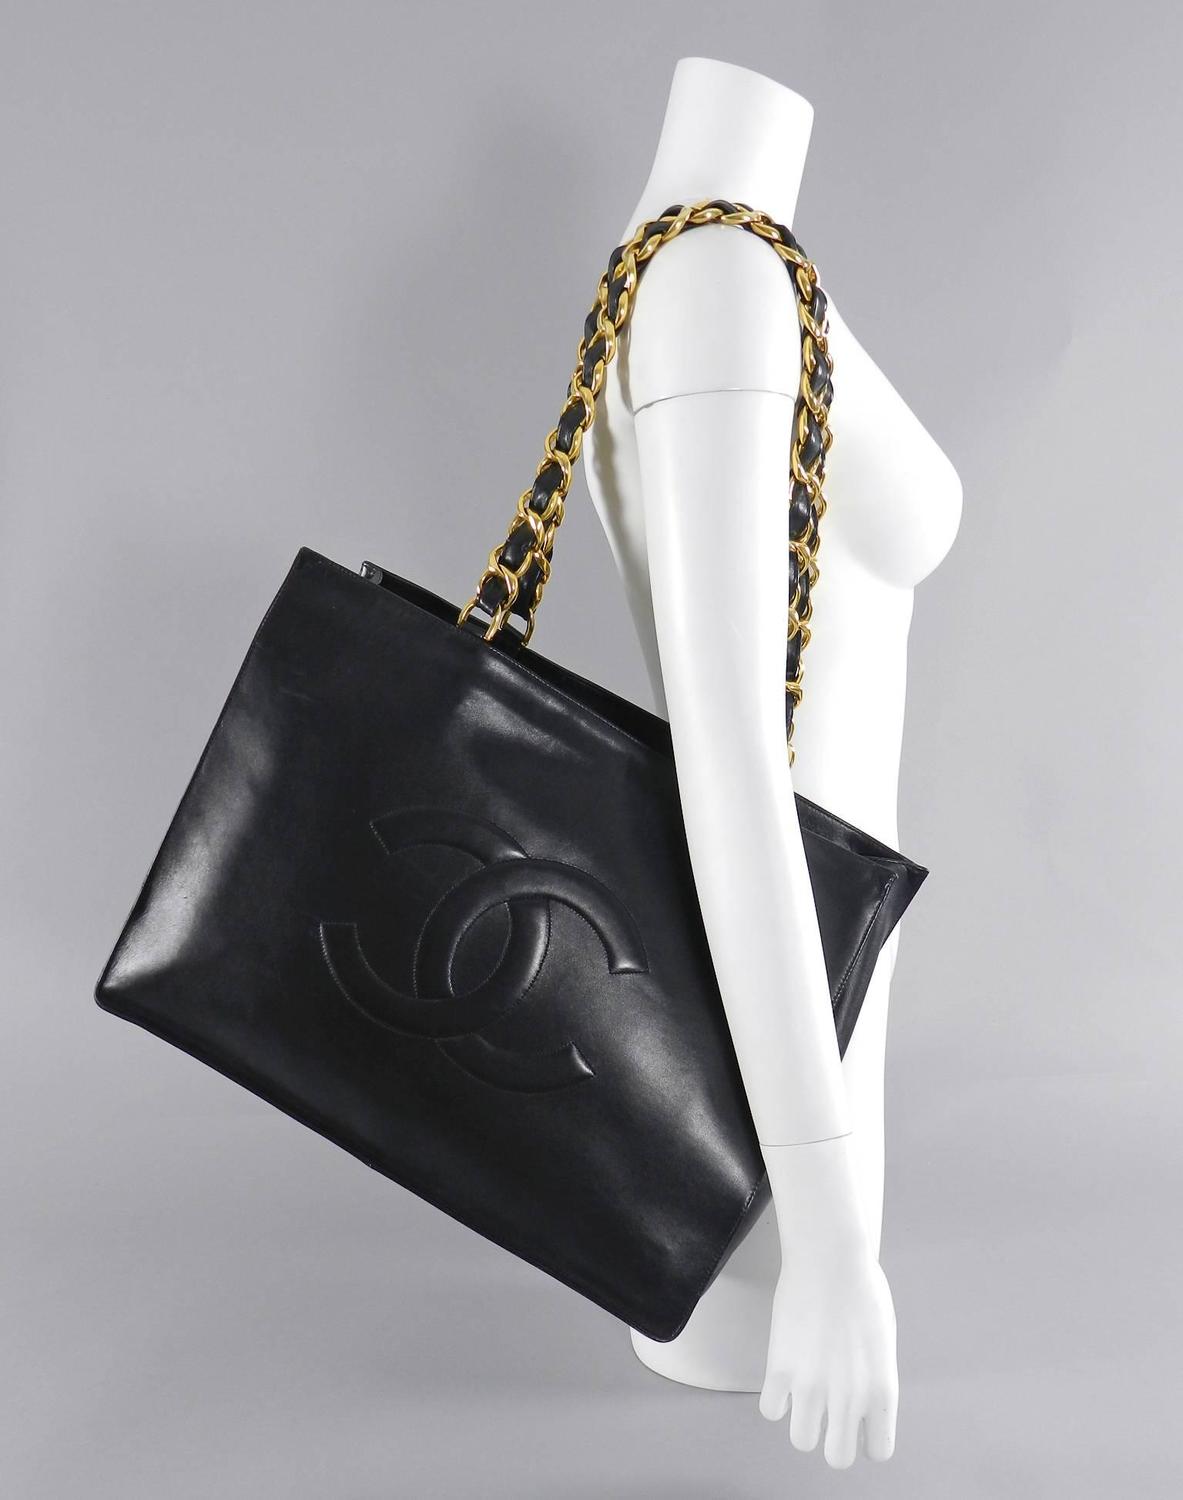 Chanel Vintage 1994 Large CC Shopper Tote with Heavy Chain Handles at 1stdibs